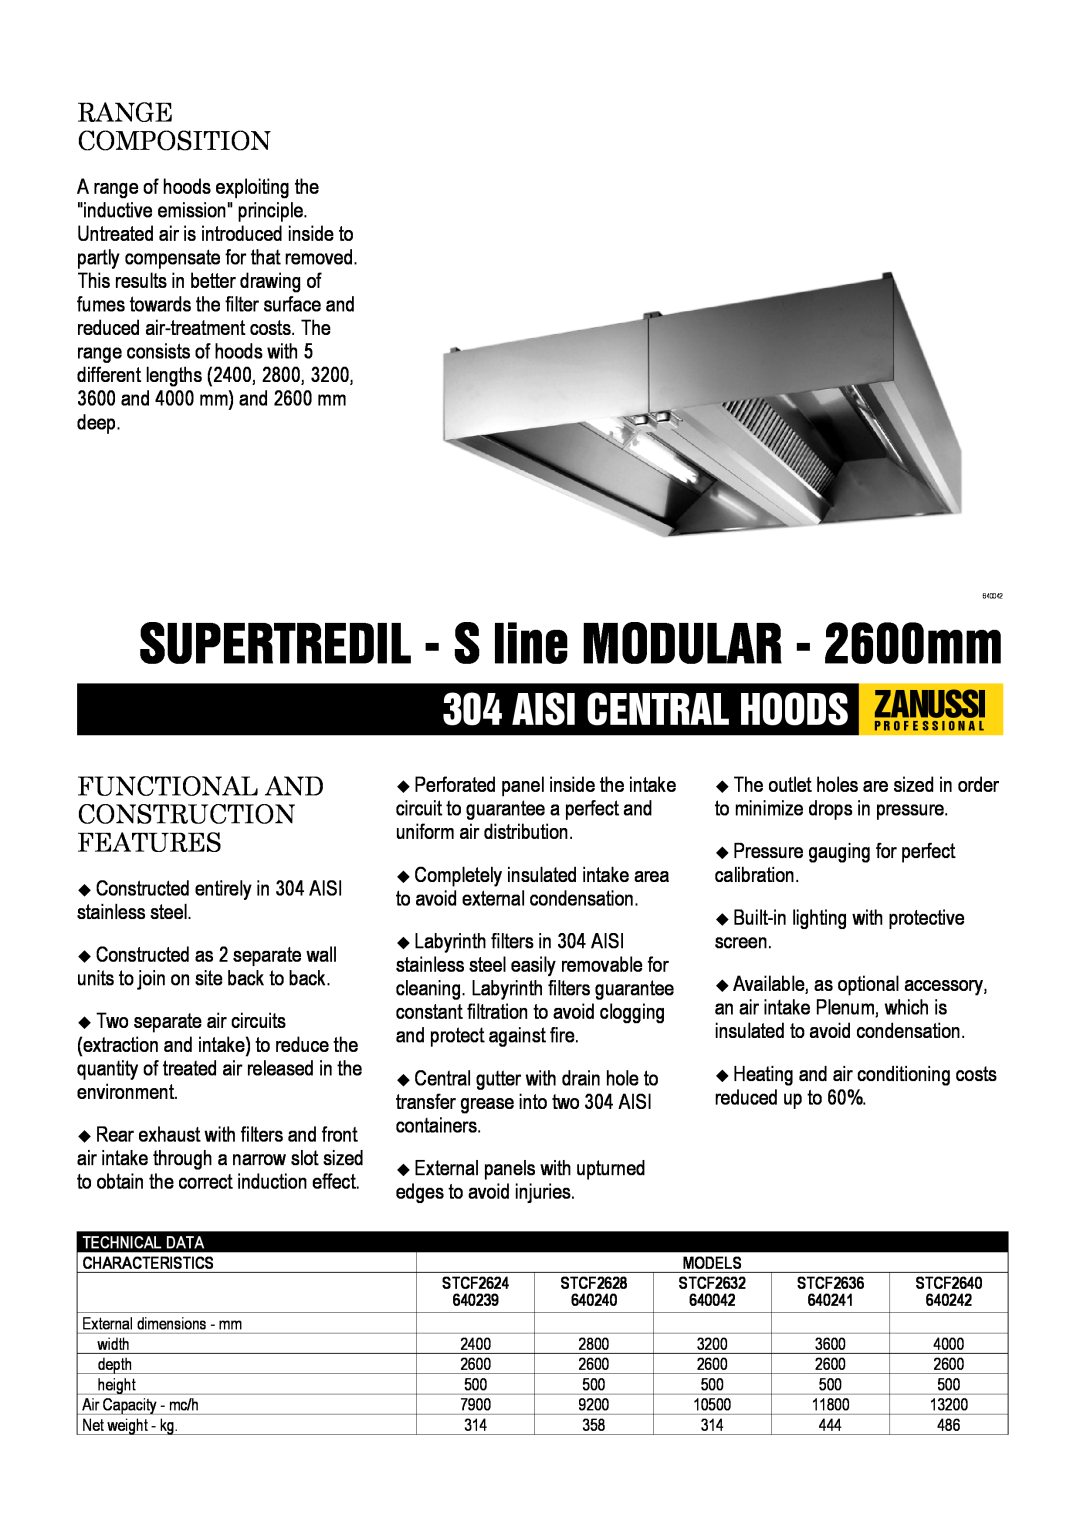 Zanussi 640242 dimensions SUPERTREDIL - S line MODULAR - 2600mm, Range Composition, Functional And Construction Features 